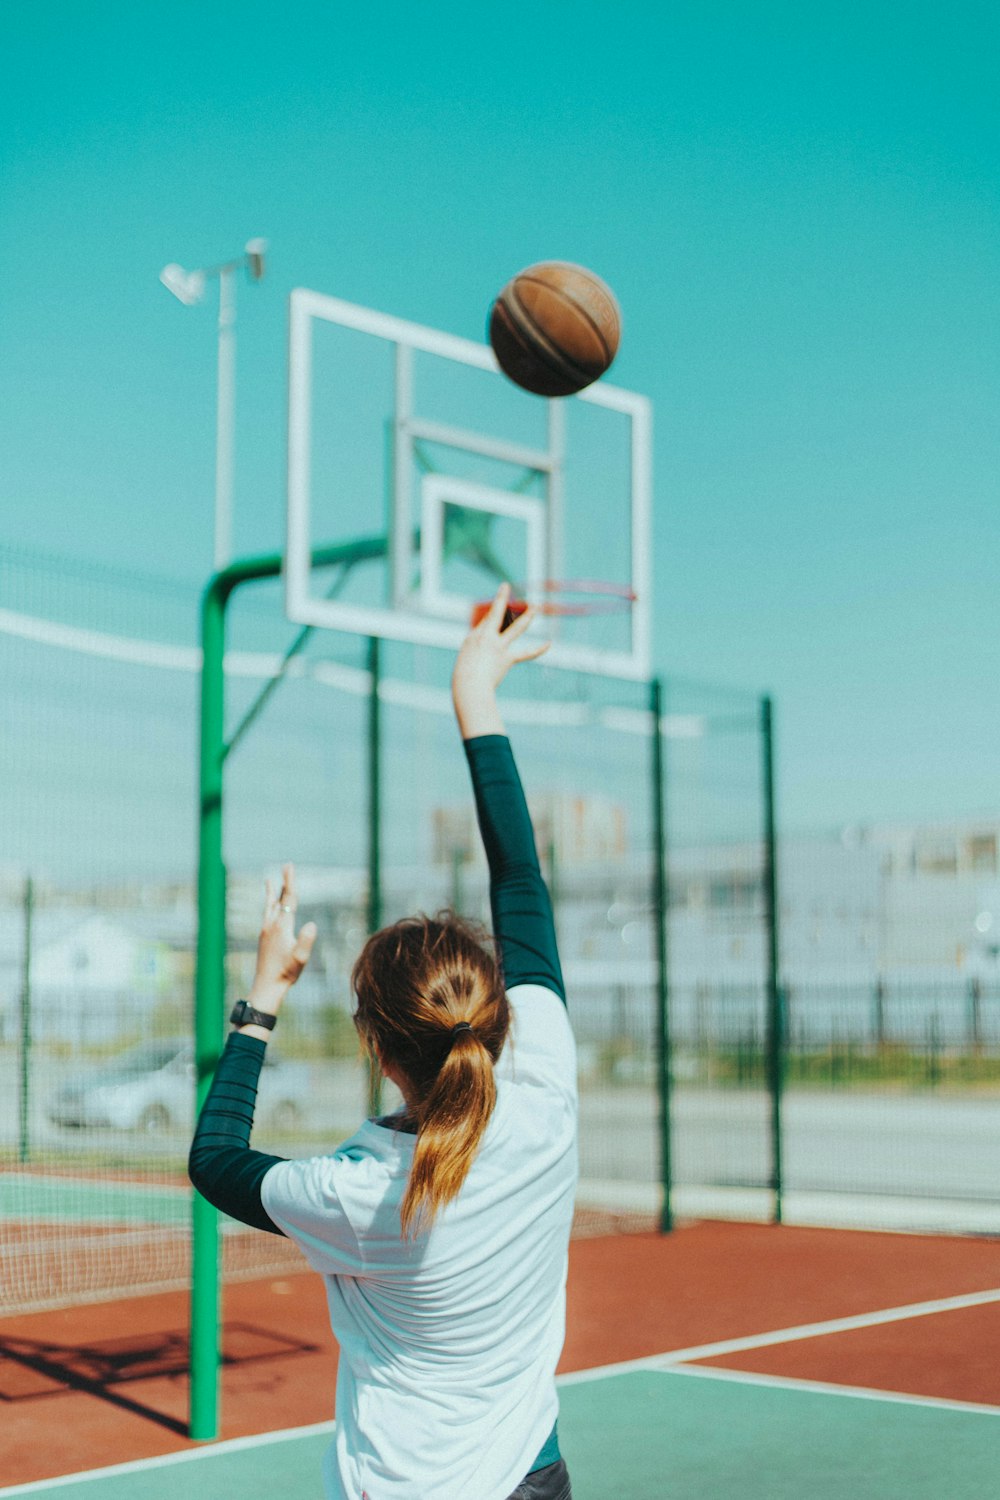 Girl Basketball Pictures | Download Free Images on Unsplash